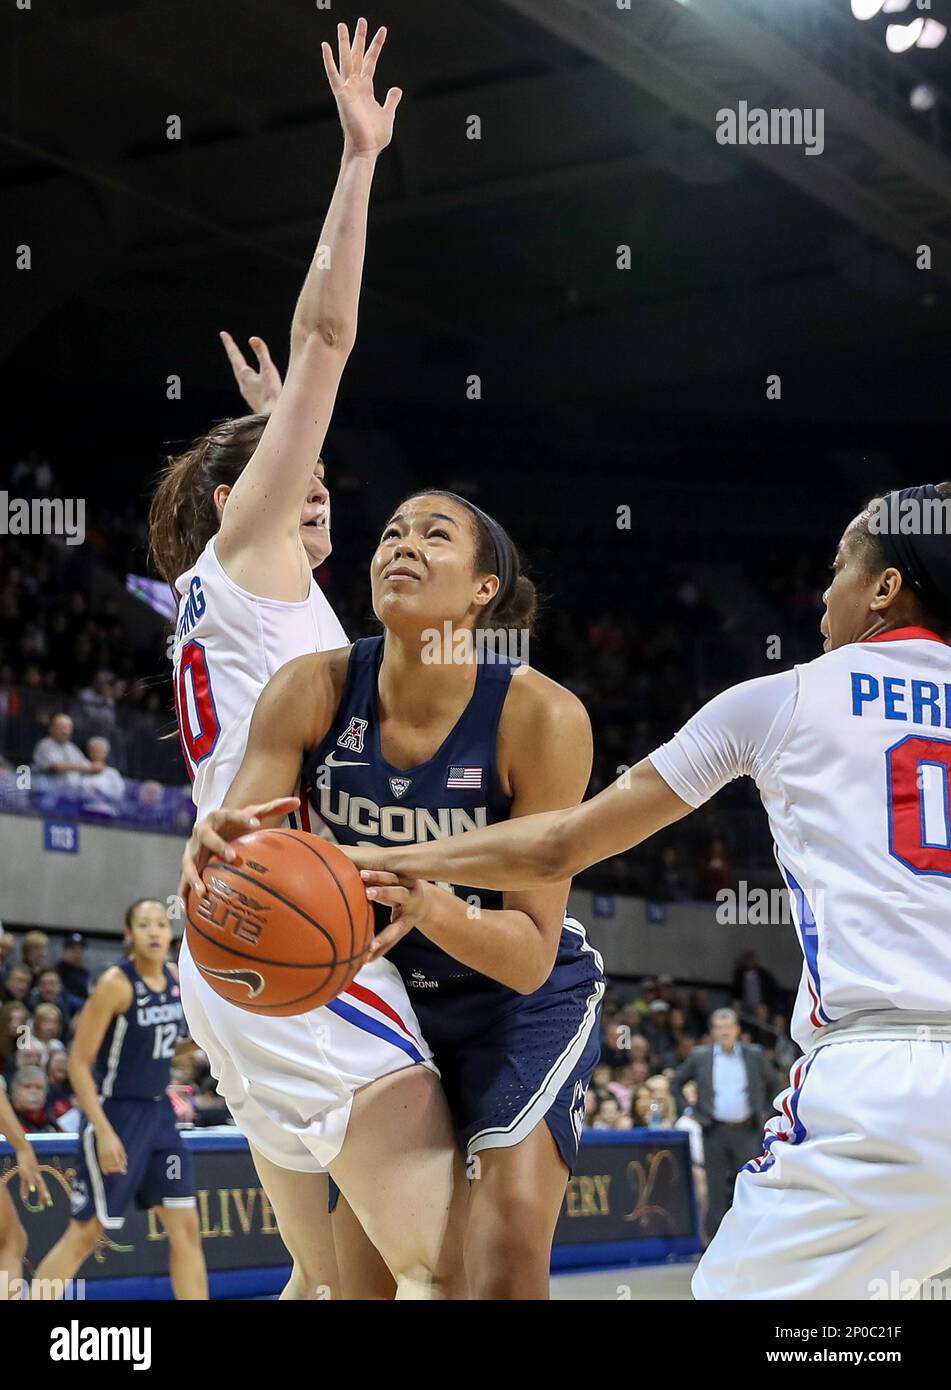 UNIVERSITY PARK, TX - JANUARY 14: Connecticut forward Napheesa Collier (c)  gets fouled on the play by SMU Kiara Perry (0) during the NCAA women's  basketball game between the Connecticut Huskies and